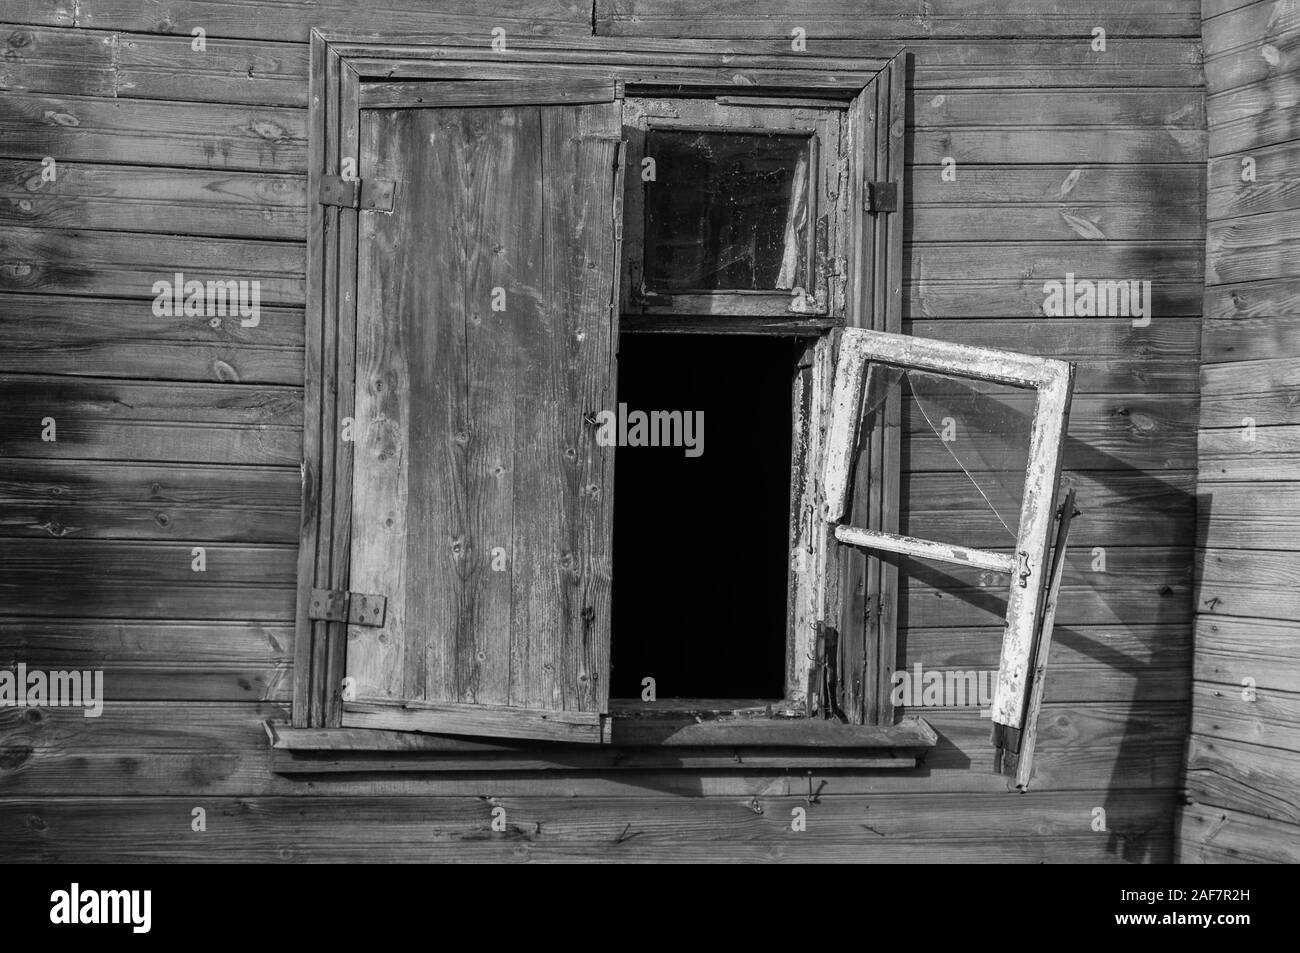 Broken window frame of old wooden house. Stock Photo